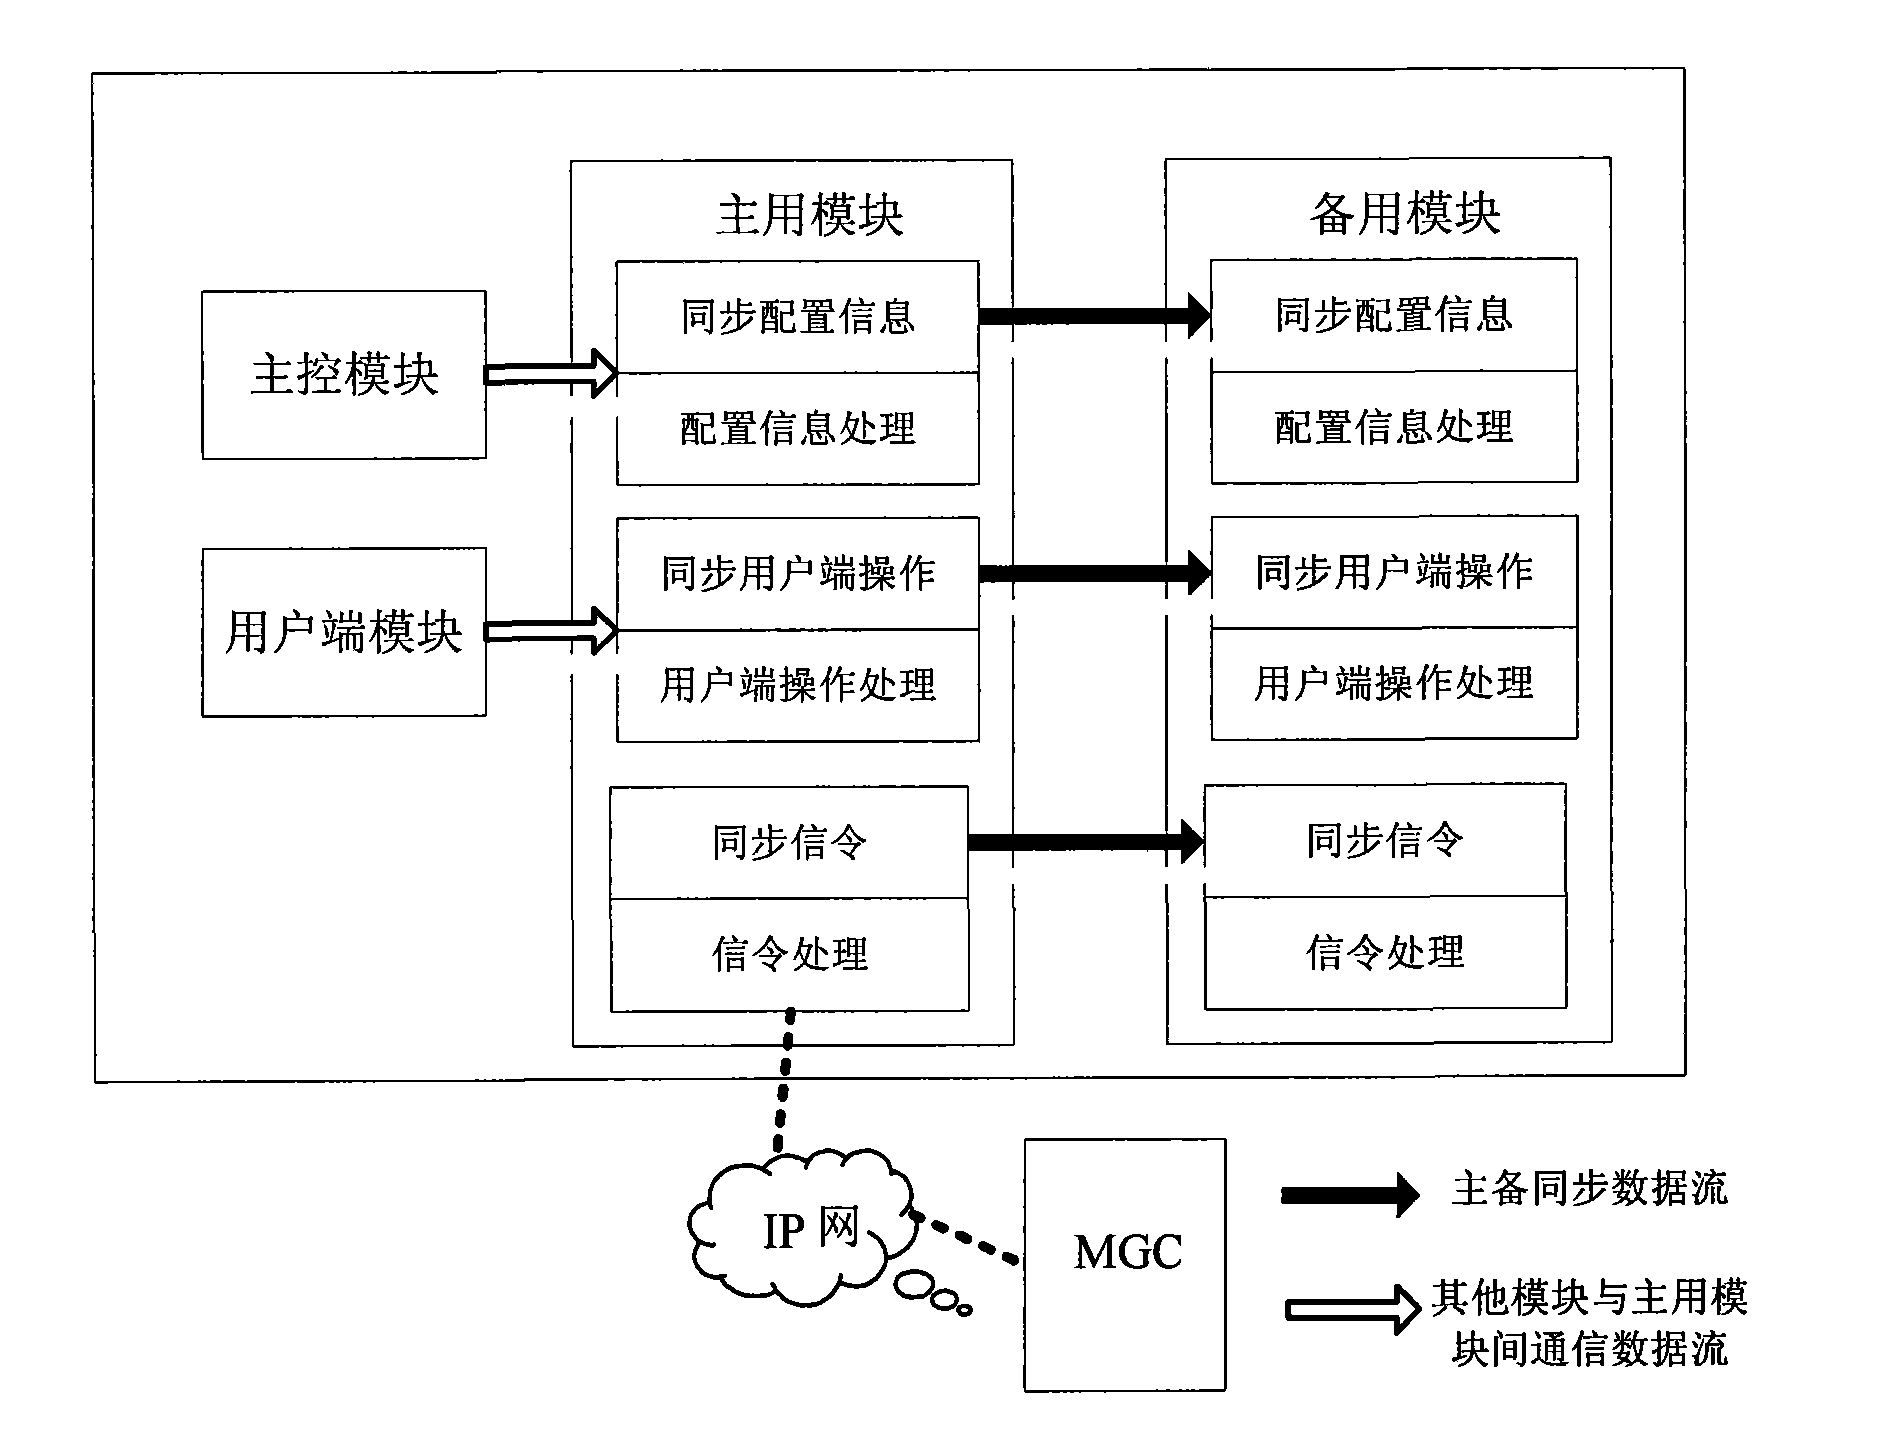 Method for synchronous and real-time reversion for VOIP voice service primary and standby modules